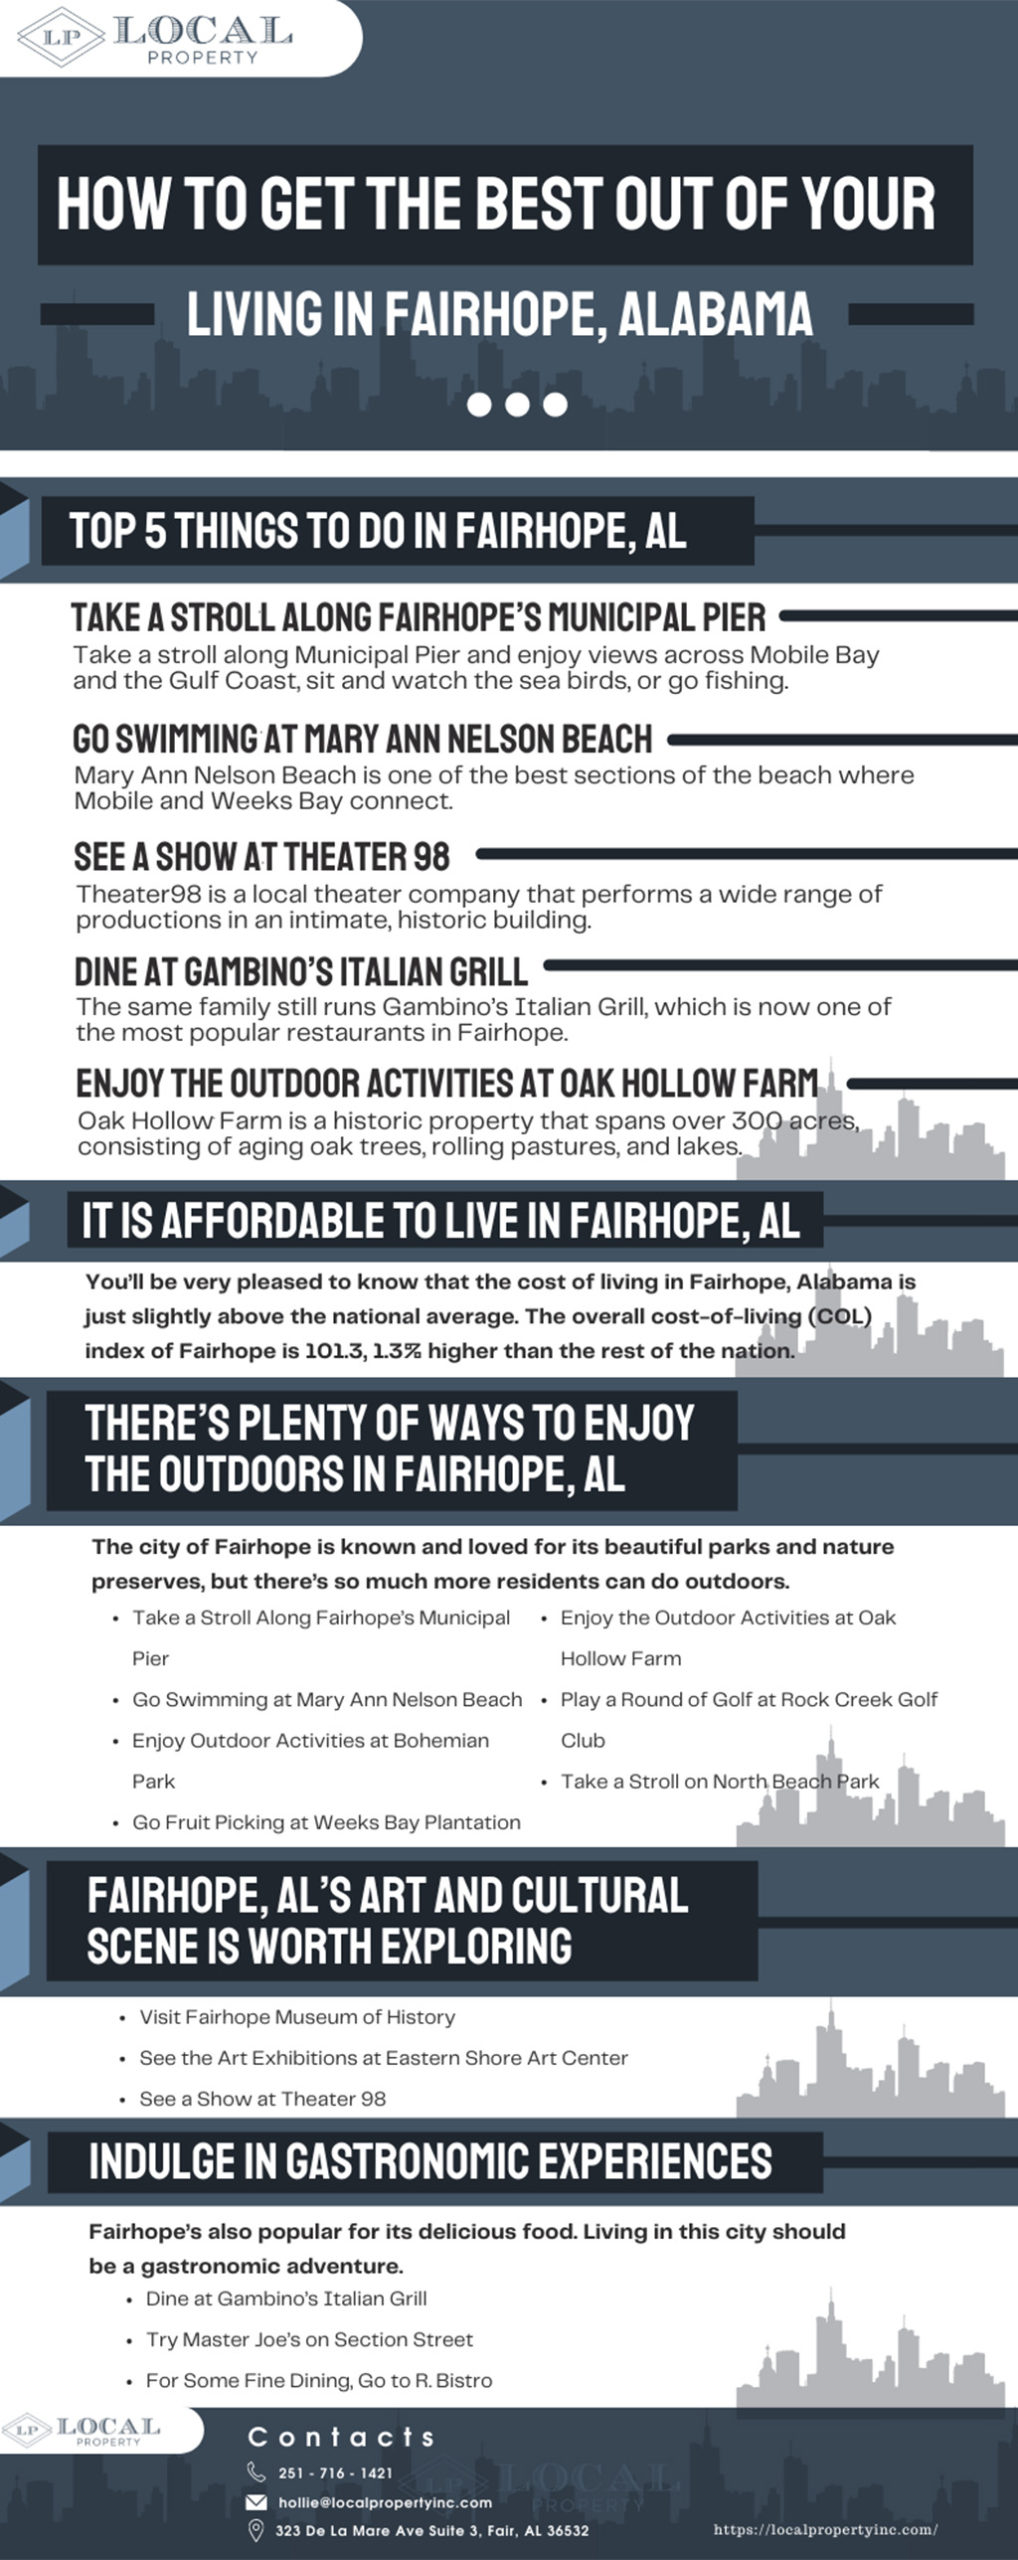 How To Get The Best Out Of Your Living In Fairhope Alabama infographic